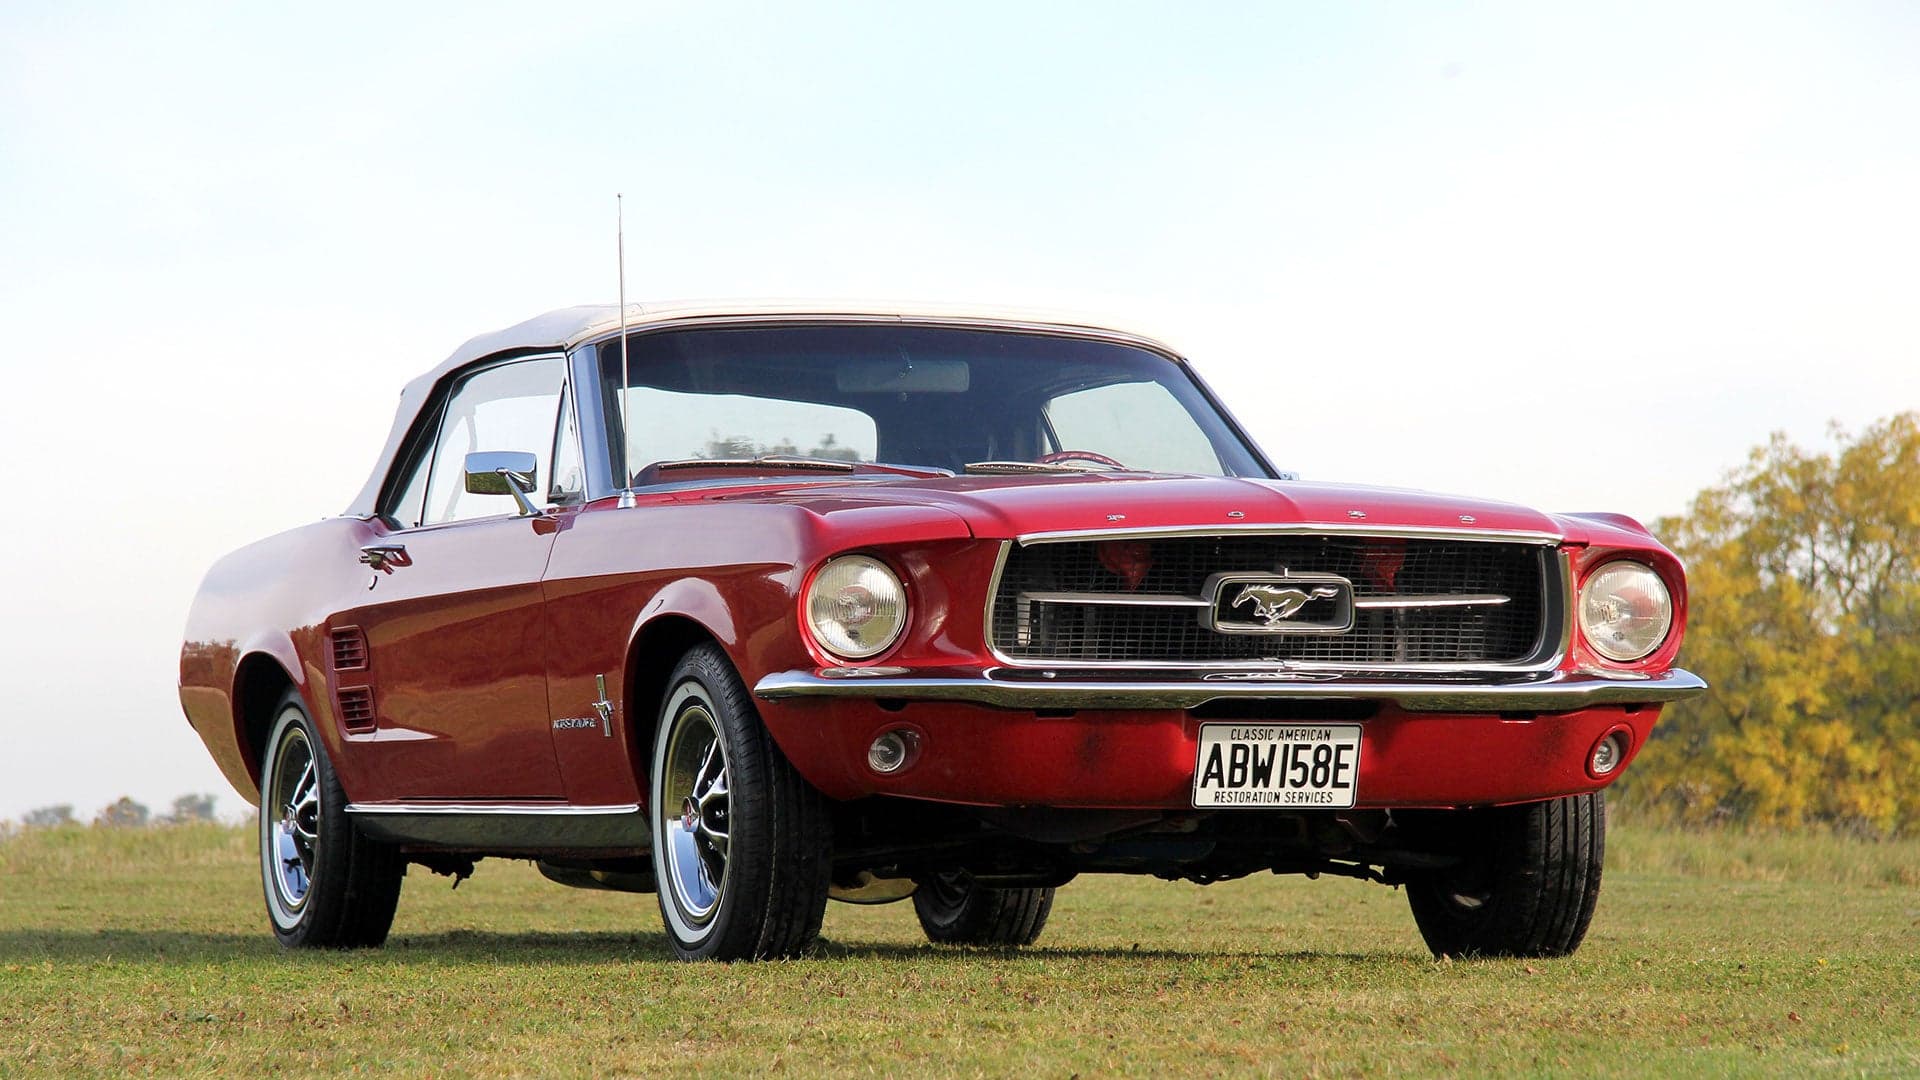 Game of Thrones Alert: Lord Lannister’s Mustang Can Be Yours